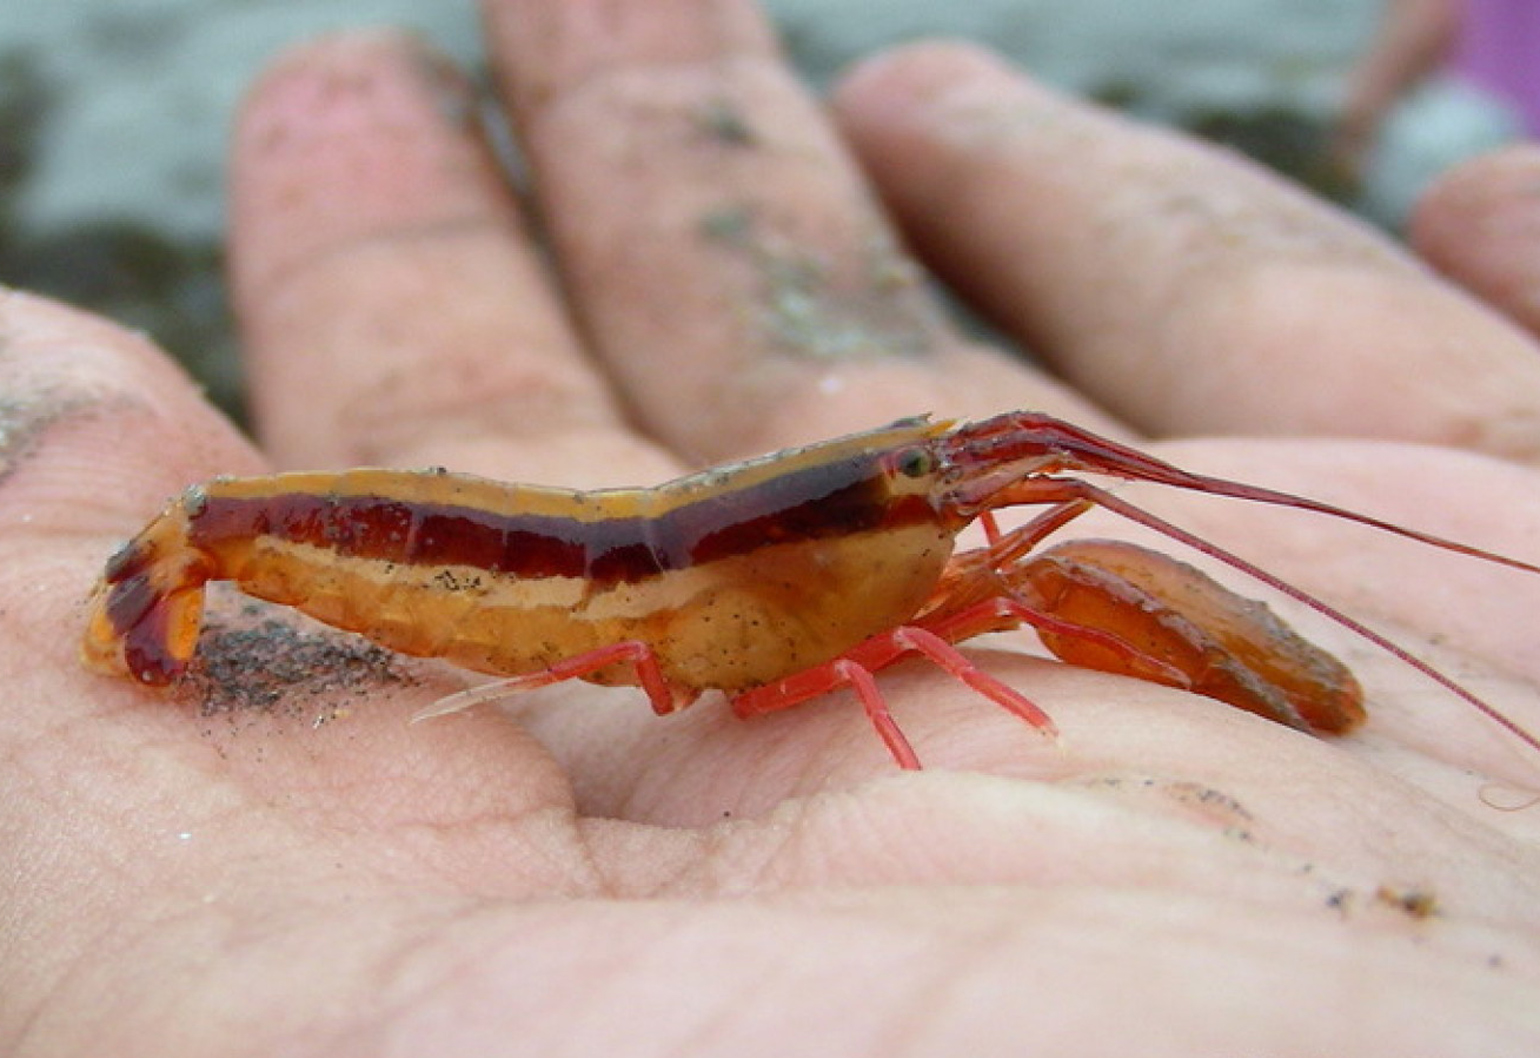 One fusion startup hopes the pistol shrimp can unlock energy's 'holy grail'  - Create